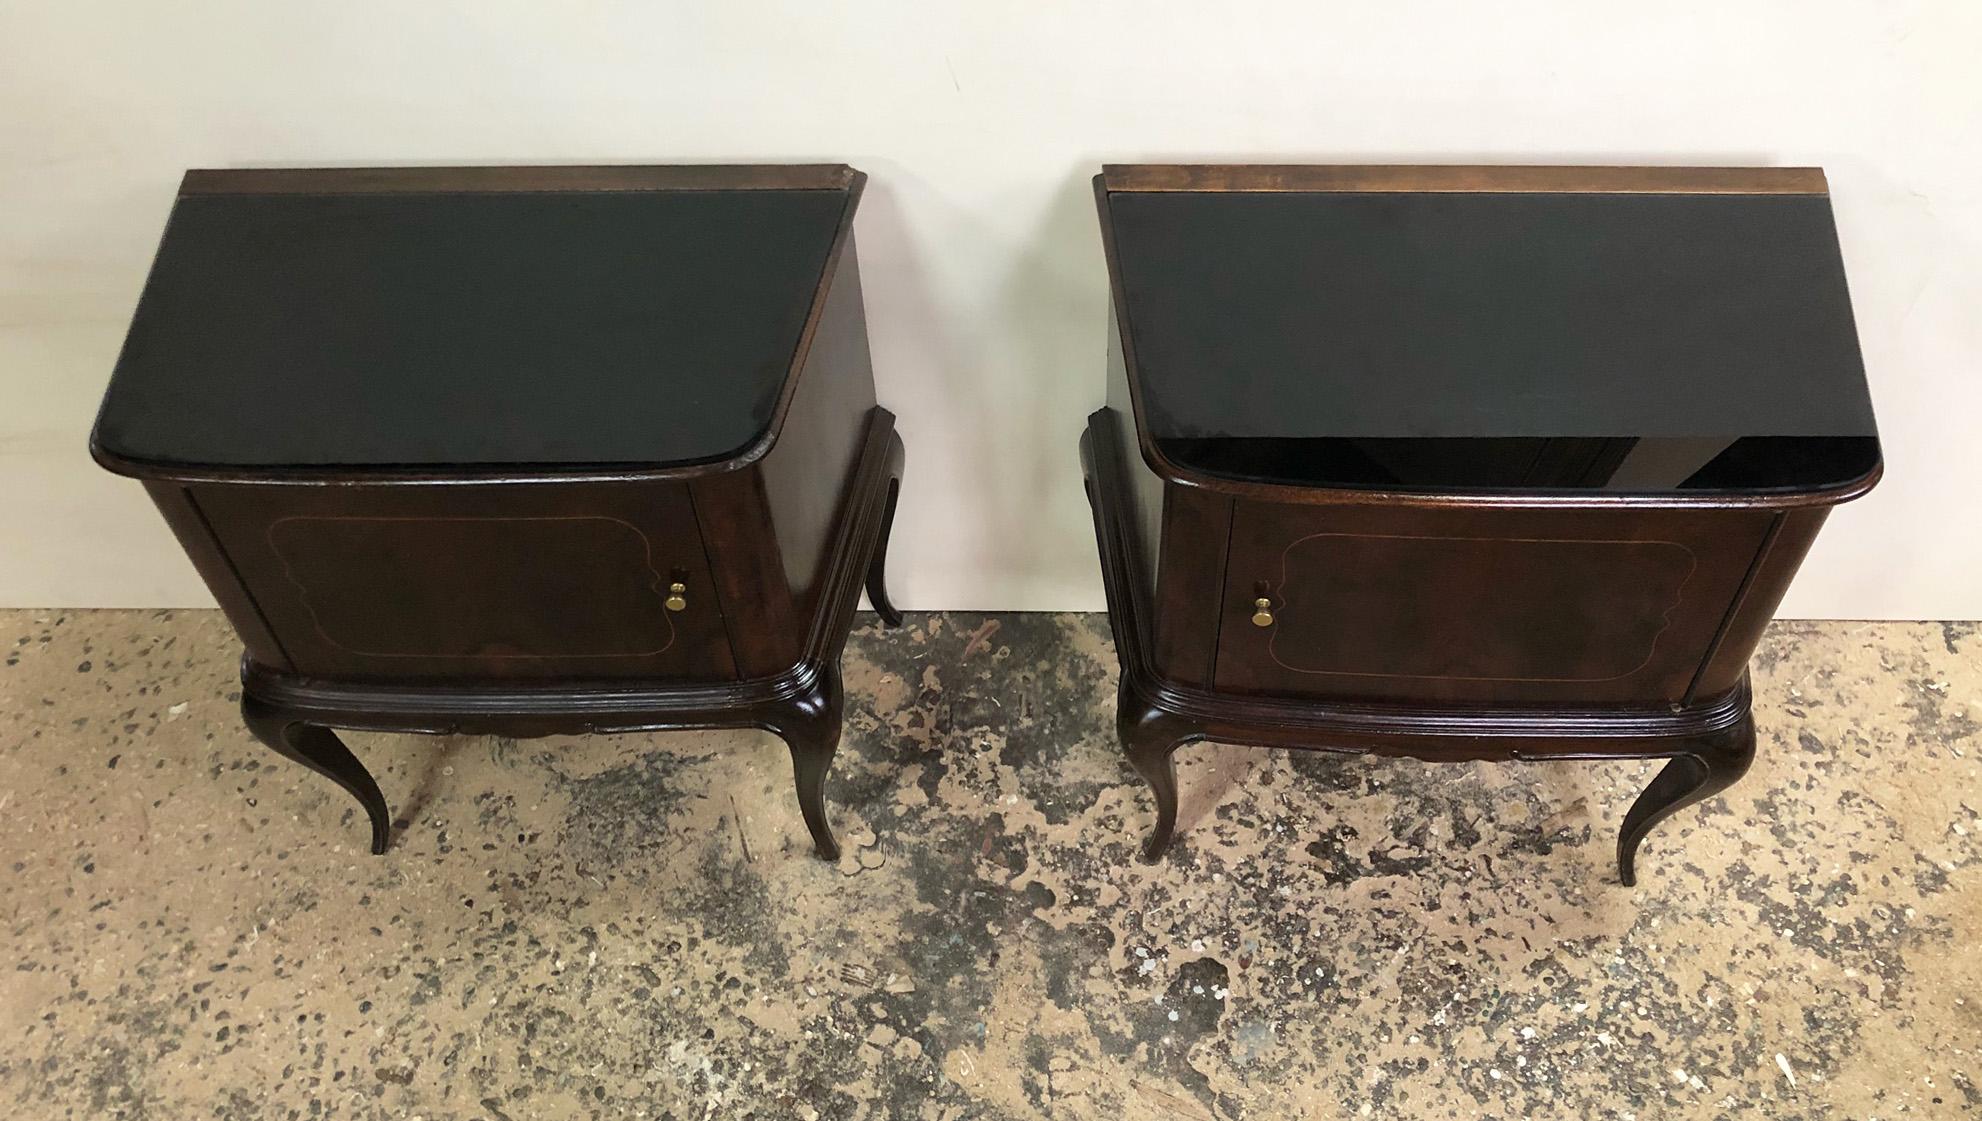 Pair of Italian night stands, in walnut  honeycomb, with inlay, originals from 1950, black glass top. 
One is Right and one is left.
Comes from an old country house in the Florence area of Tuscany.
As shown in the photographs and videos, there are